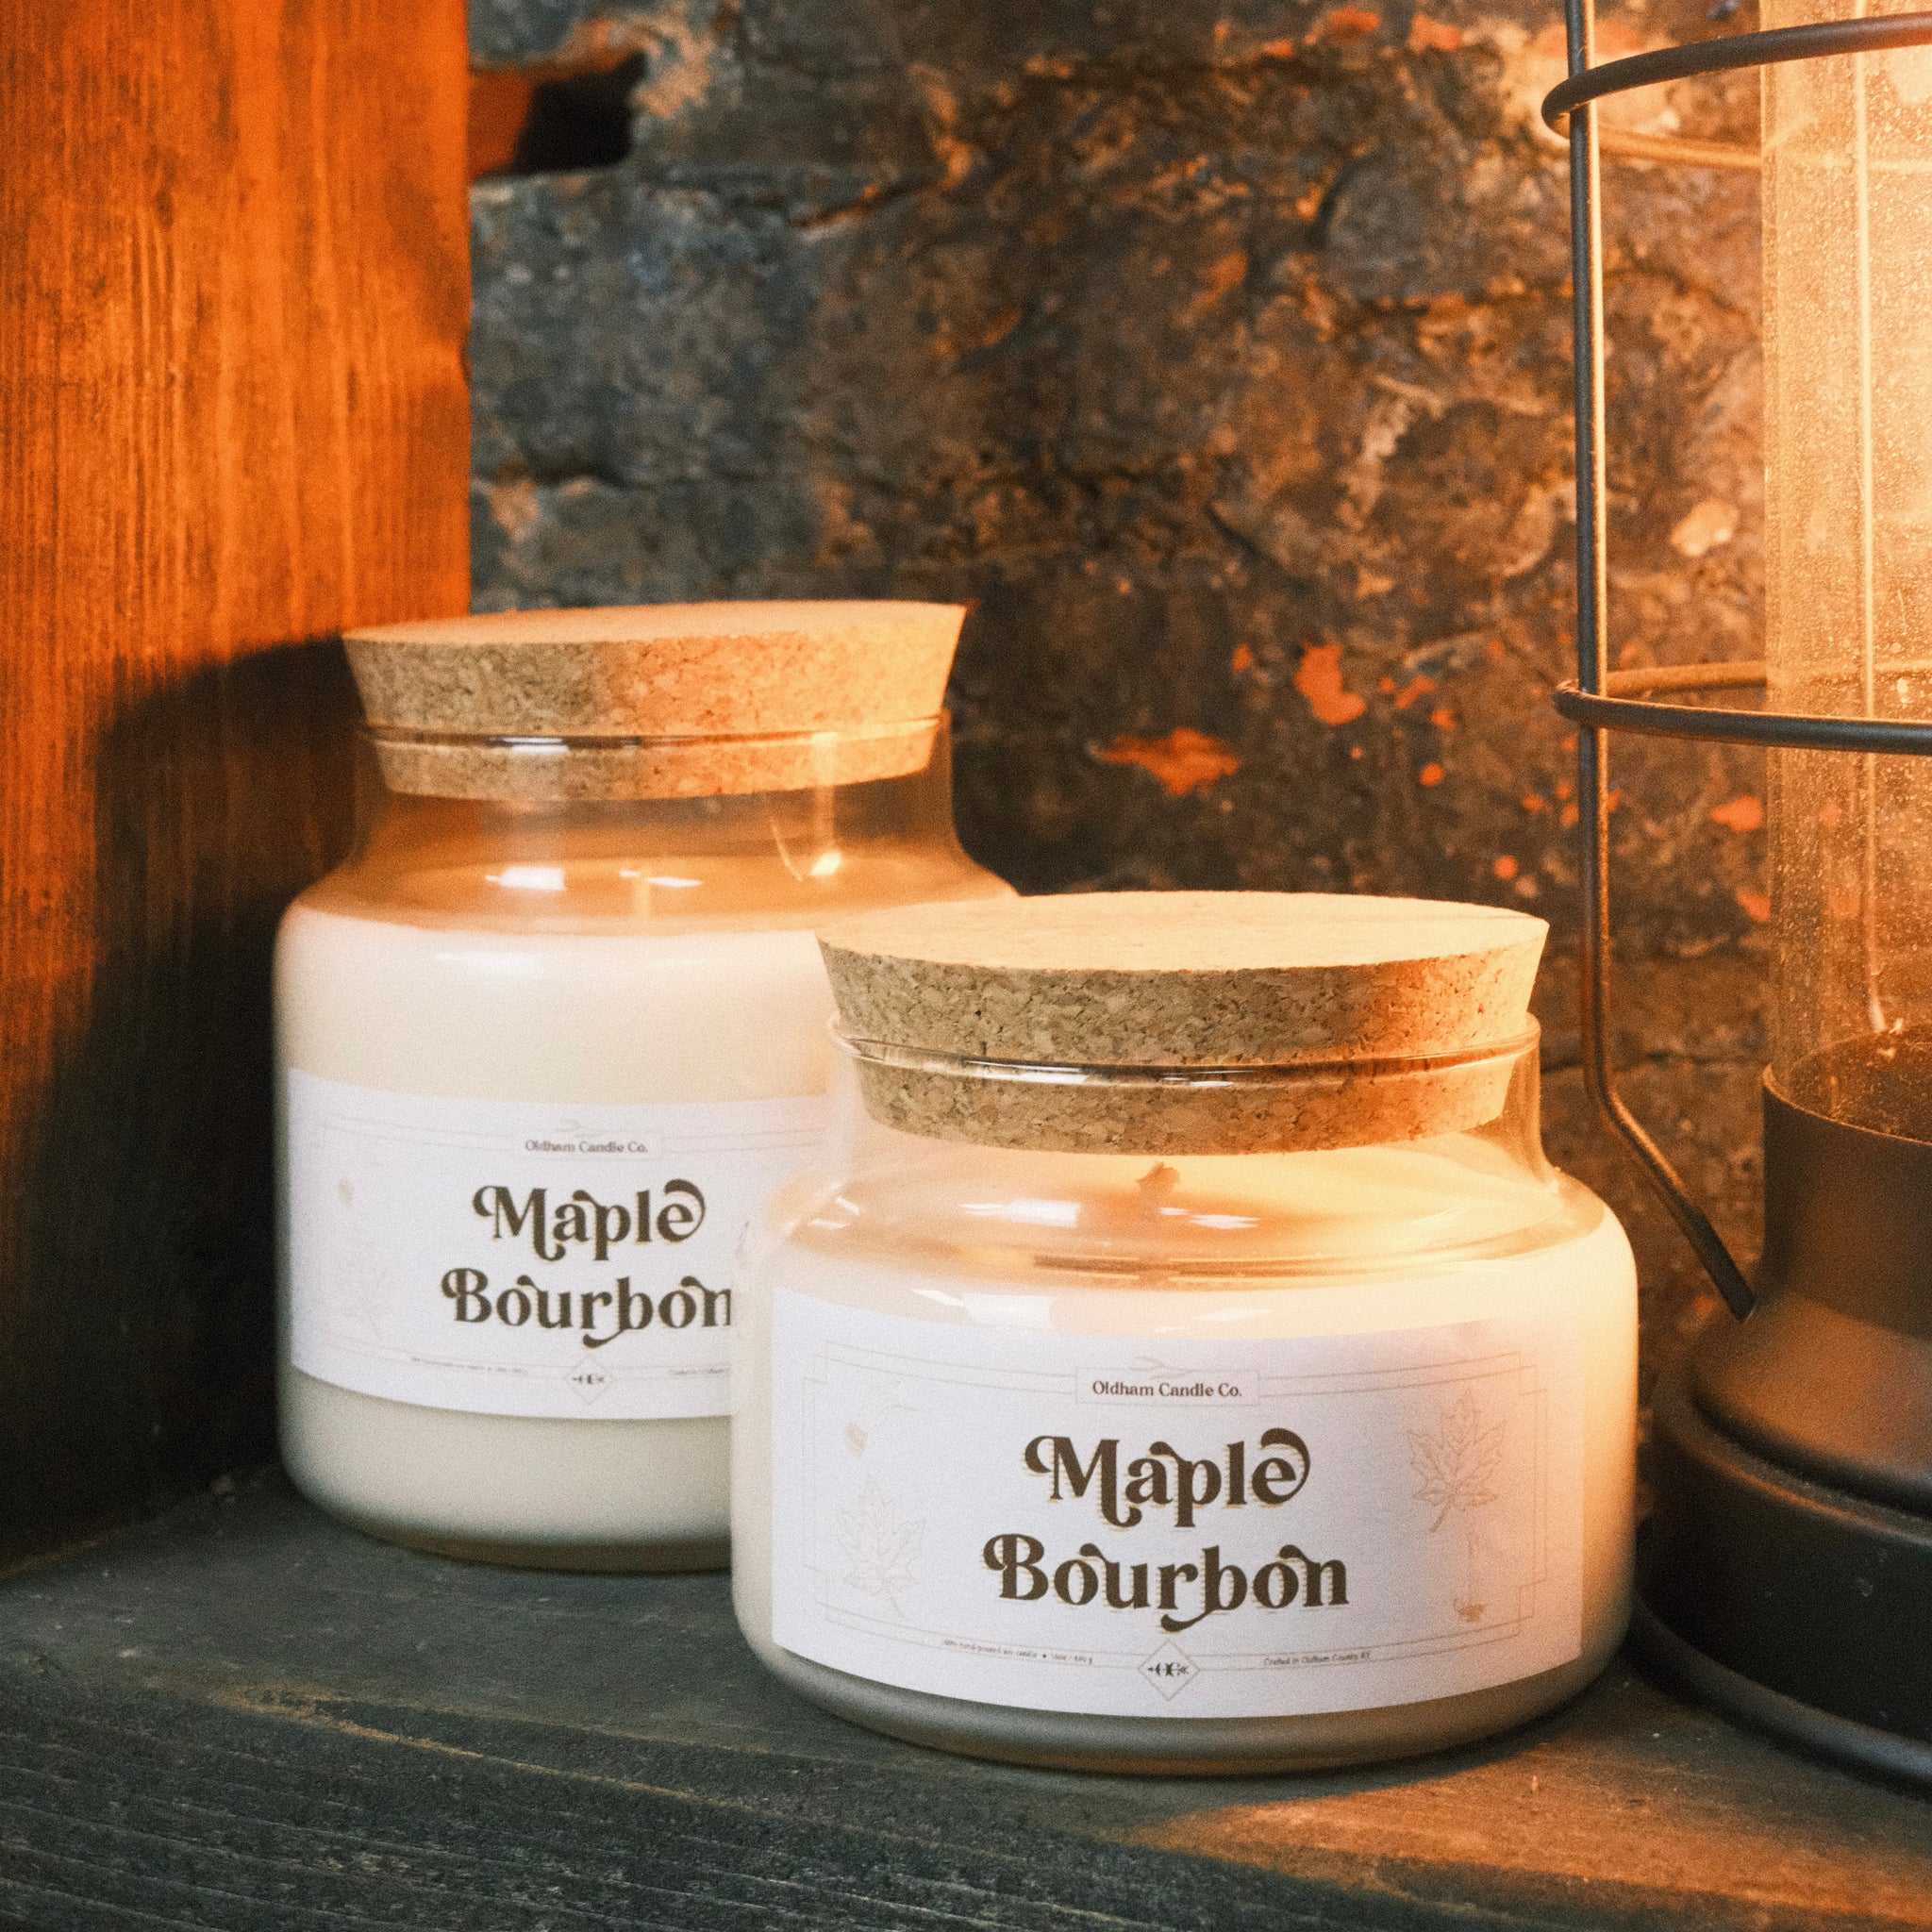 Maple Bourbon Scented Candle